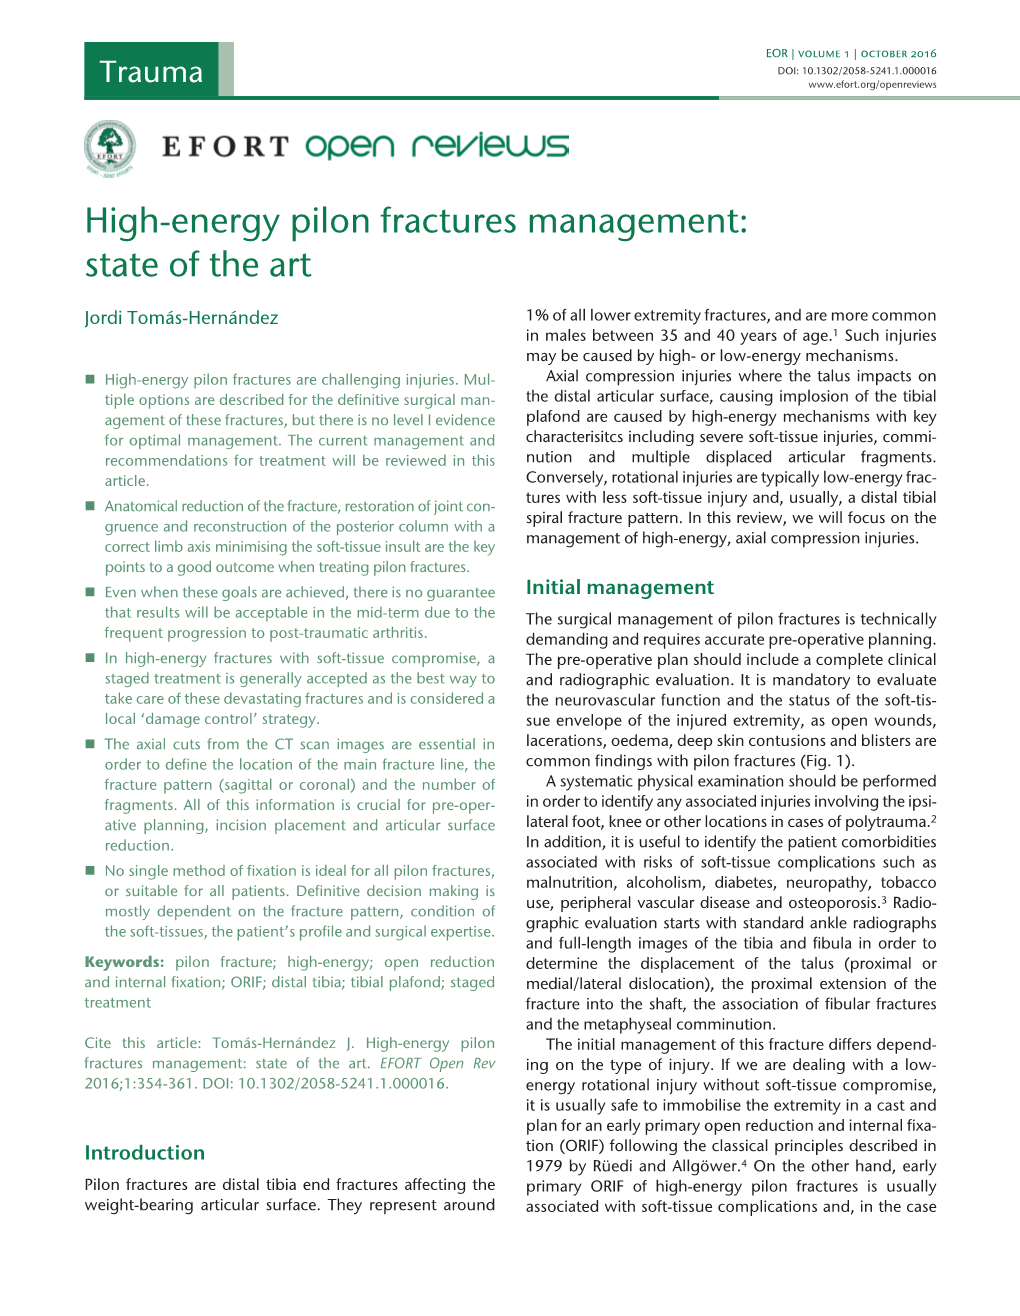 High-Energy Pilon Fractures Management: State of the Art